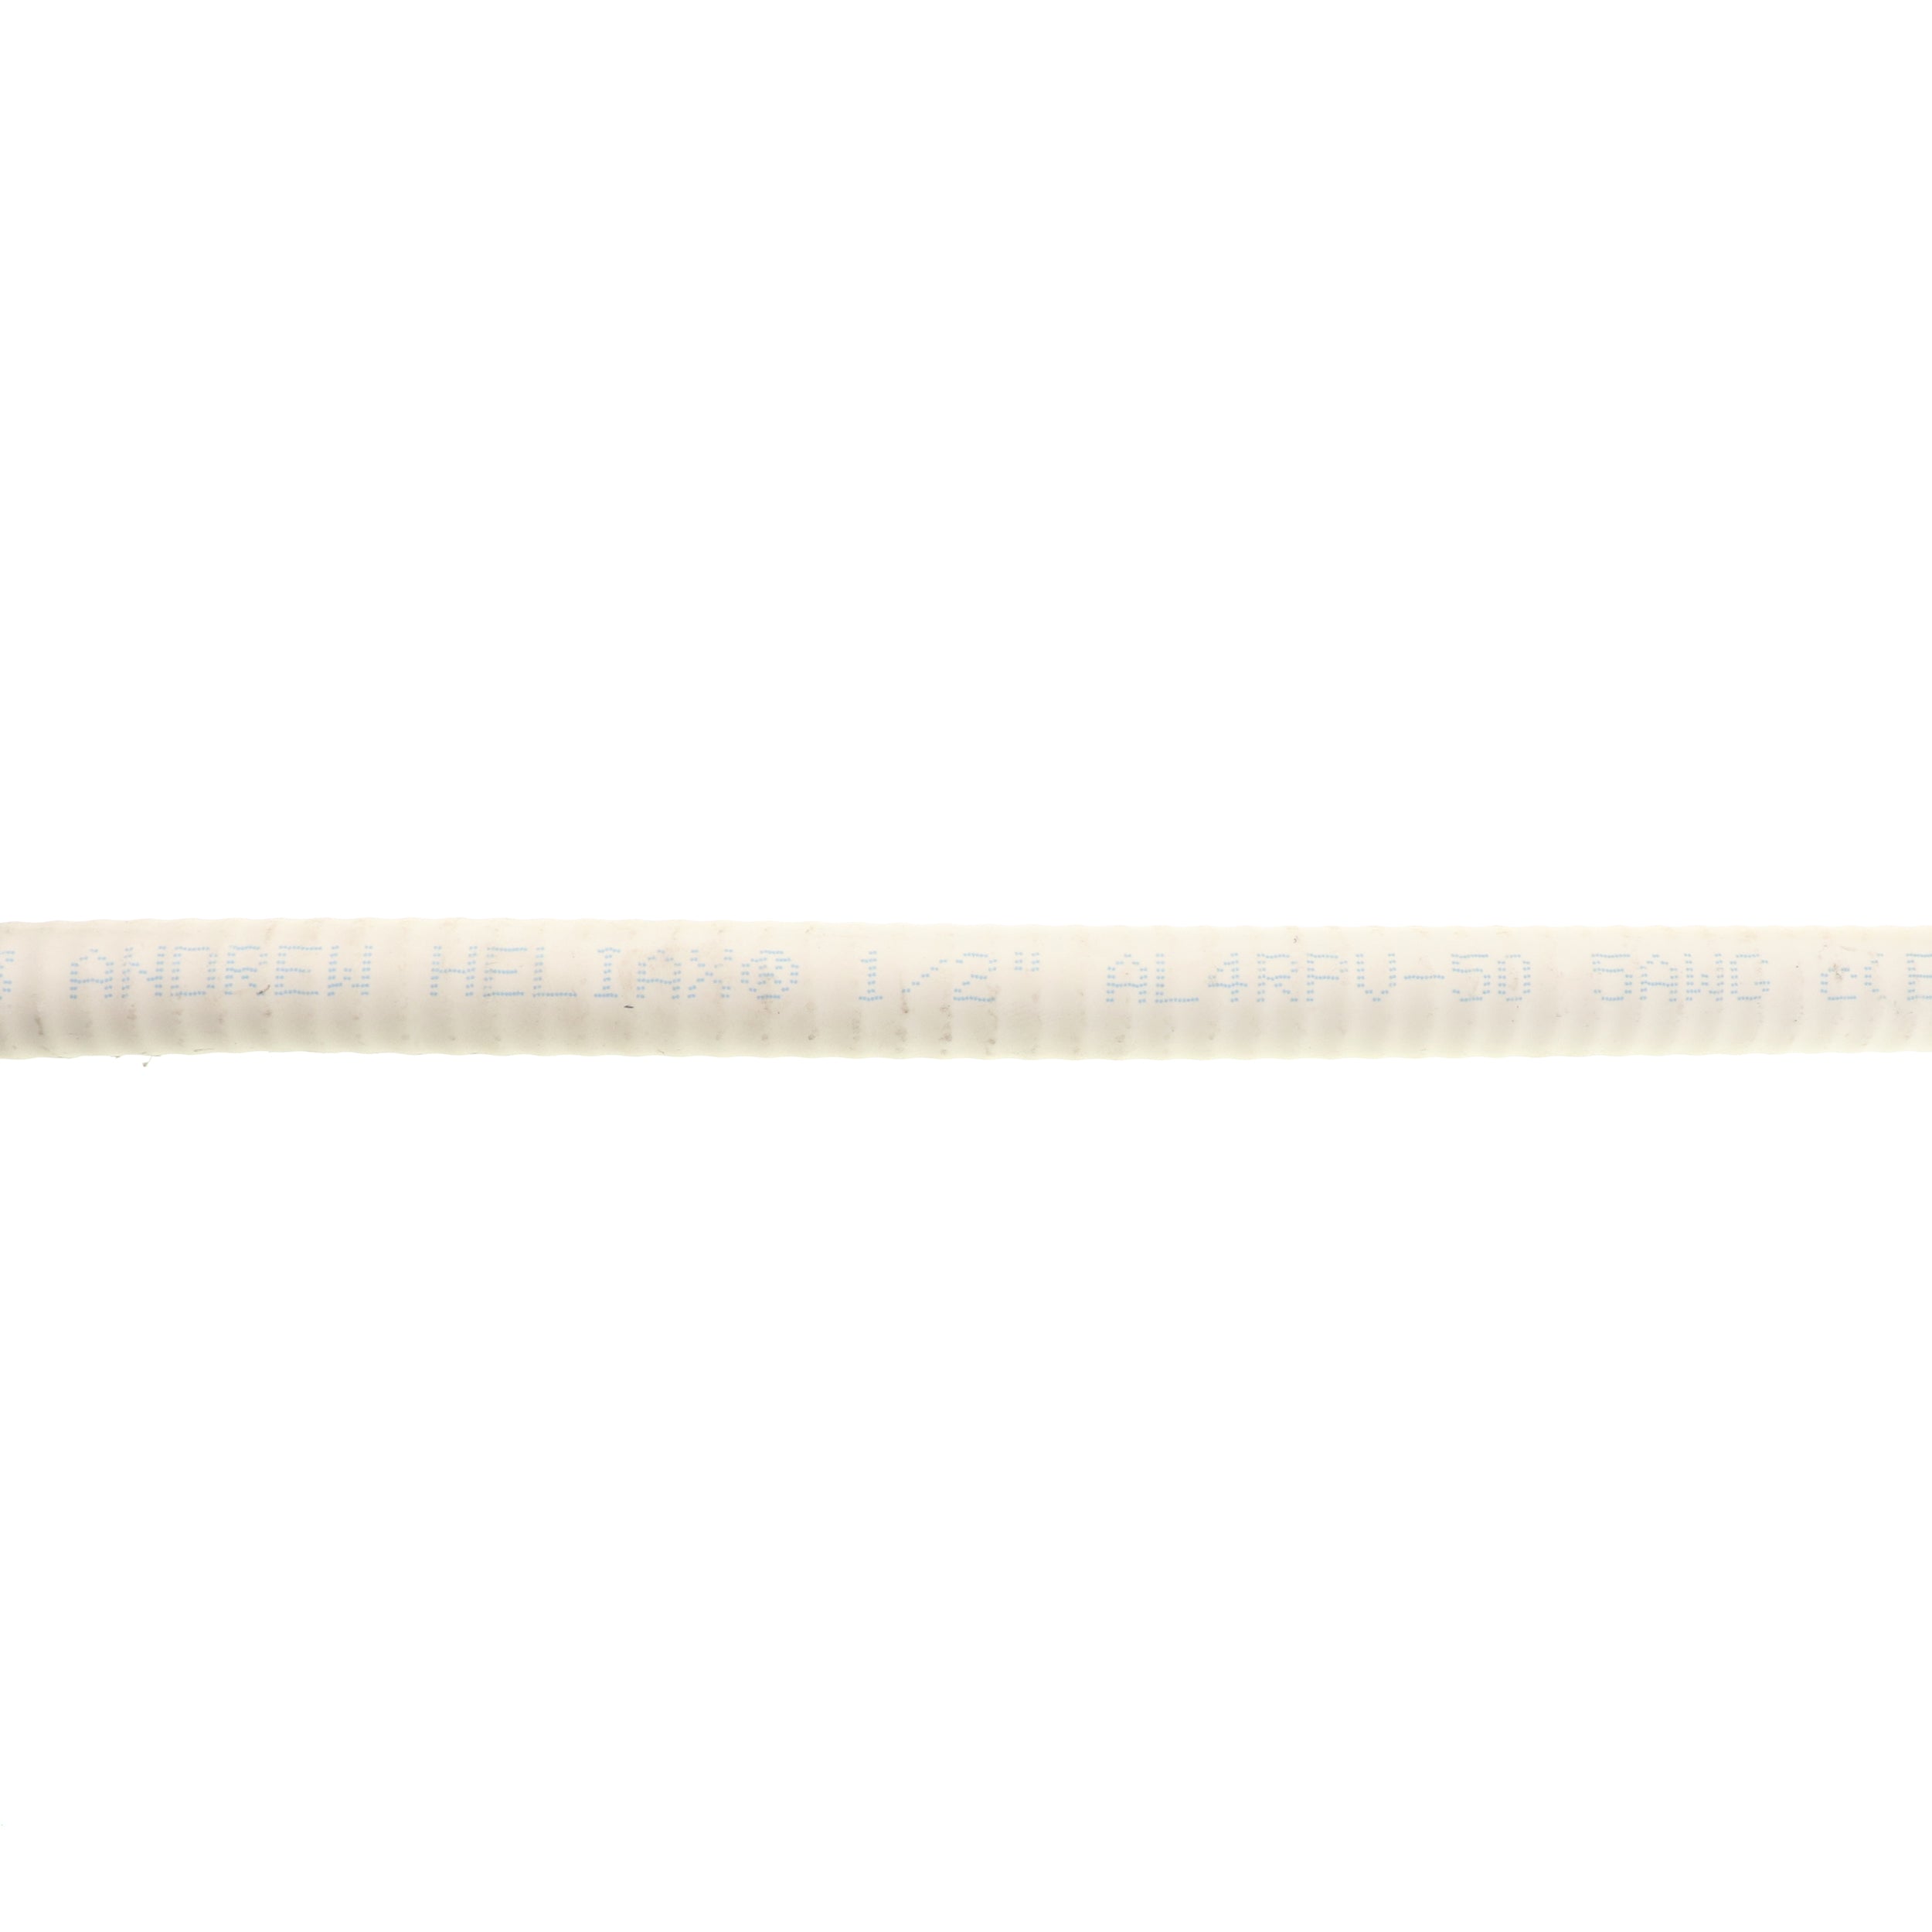 Andrew Corporation, ANDREW AL4RPV-50 HELIAX COAXIAL CABLE, 5-AWG, ARMORED, 1/2", WHITE PLENUM JACKET